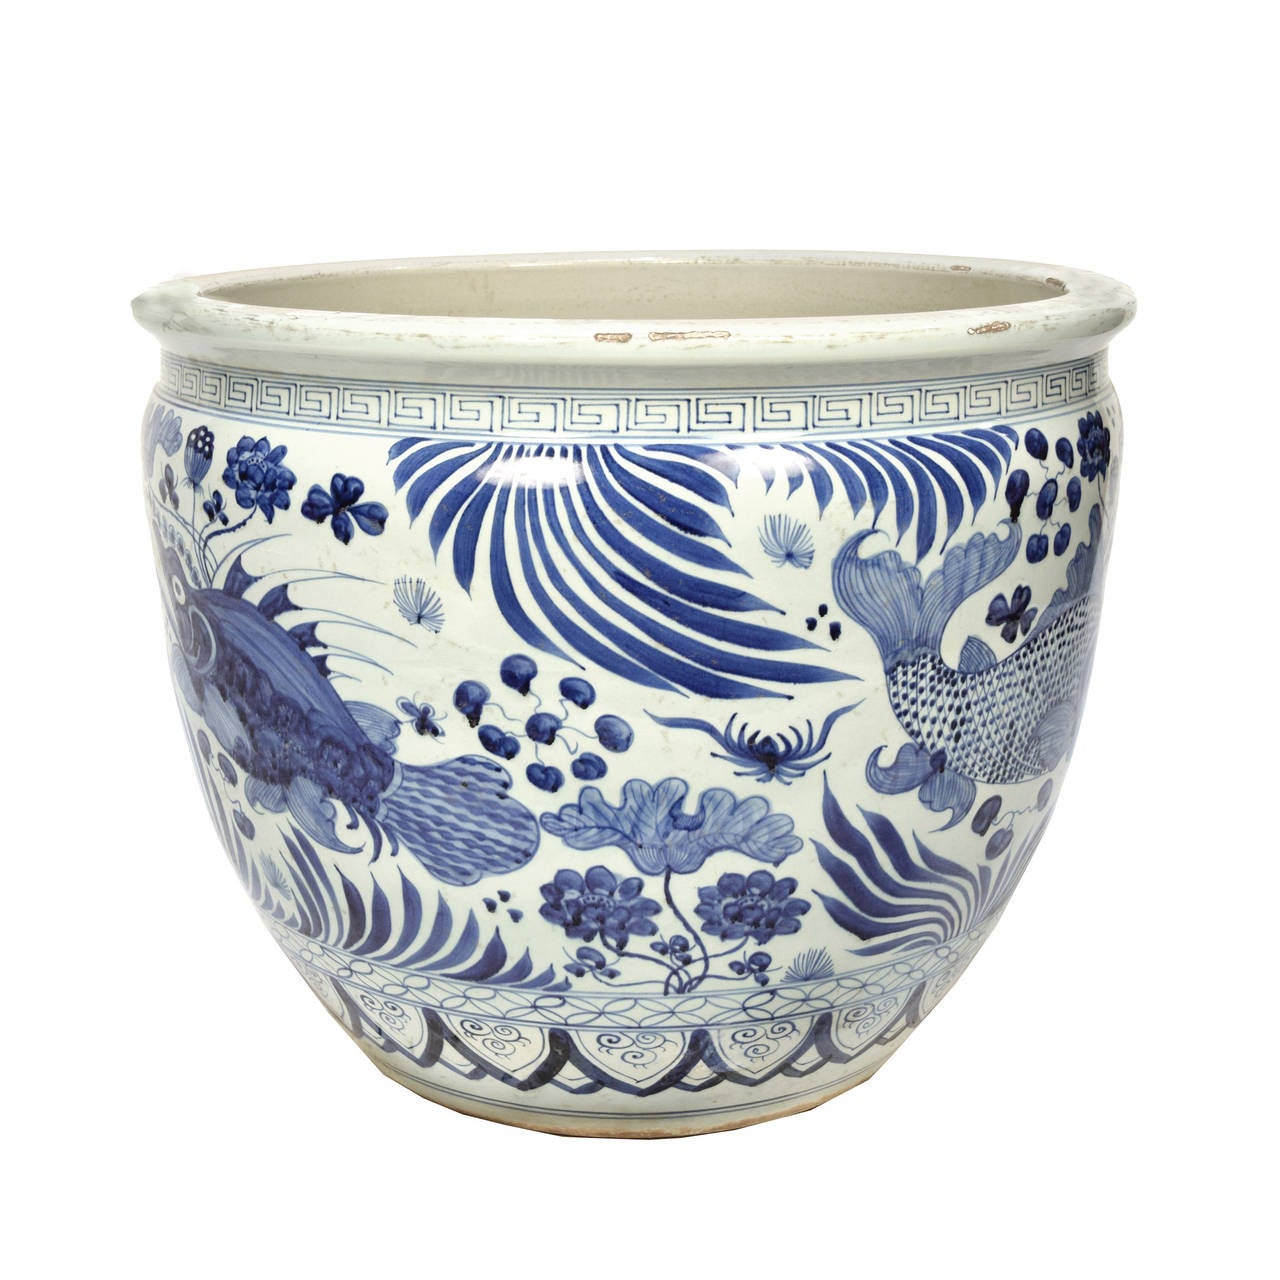 A large blue and white bowl from Beijing, China painted with varies fish and sea foliage with a meandering pattern along the top.

Pagoda Red collection # BJCC037